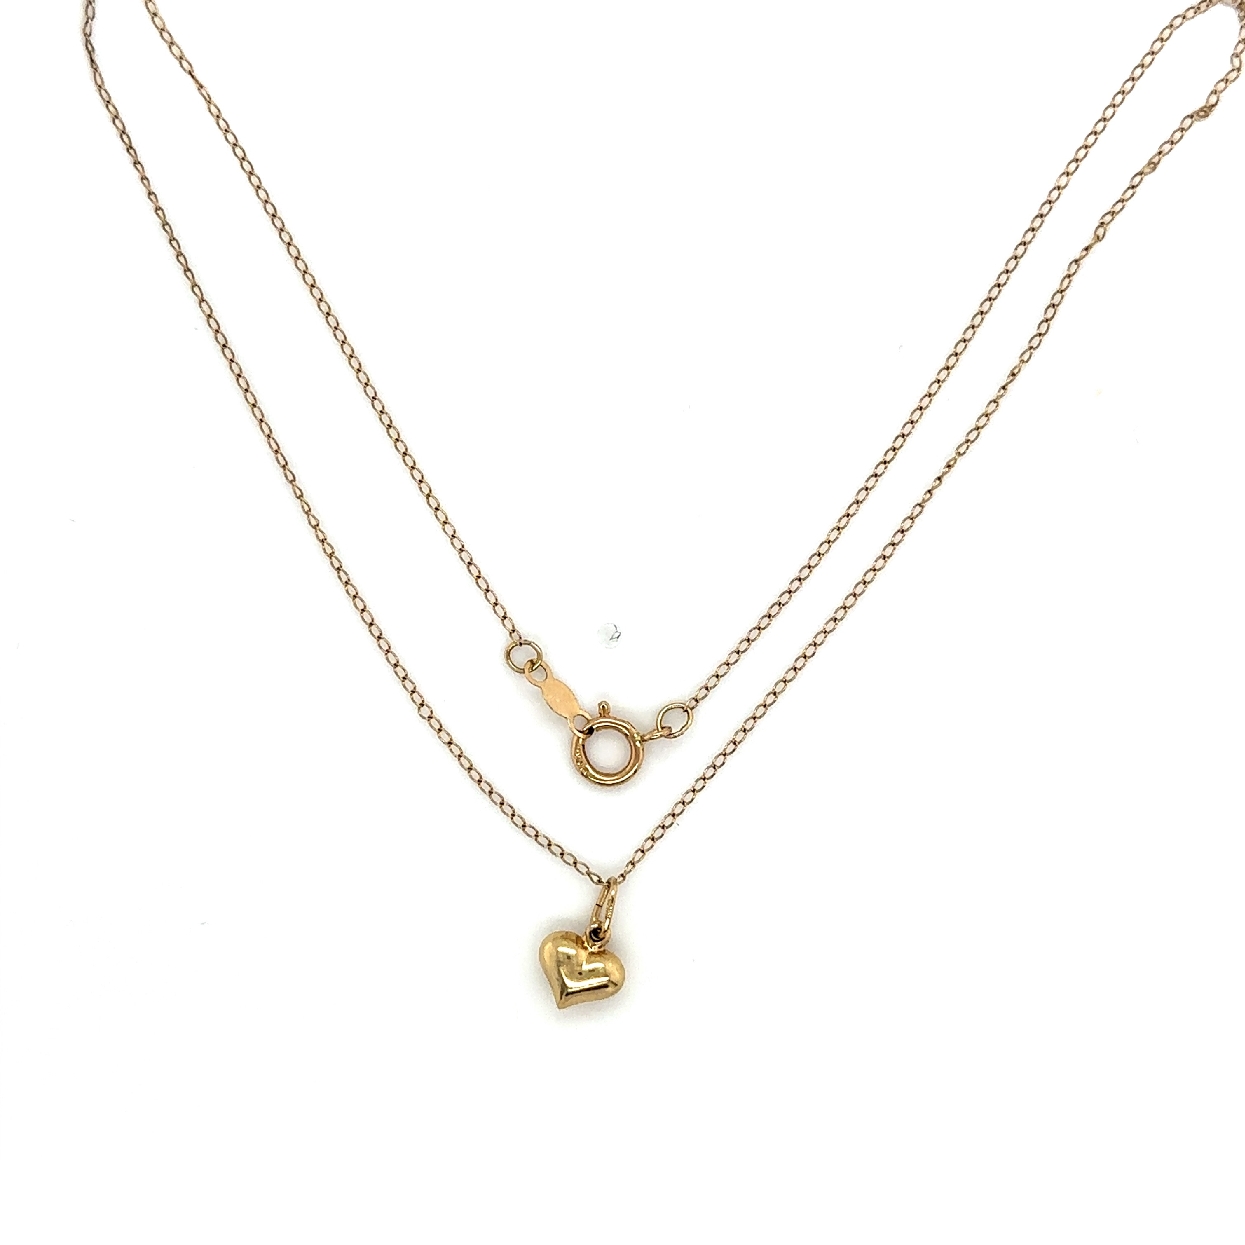 14K Yellow Gold Heart Necklace

14 Inches

